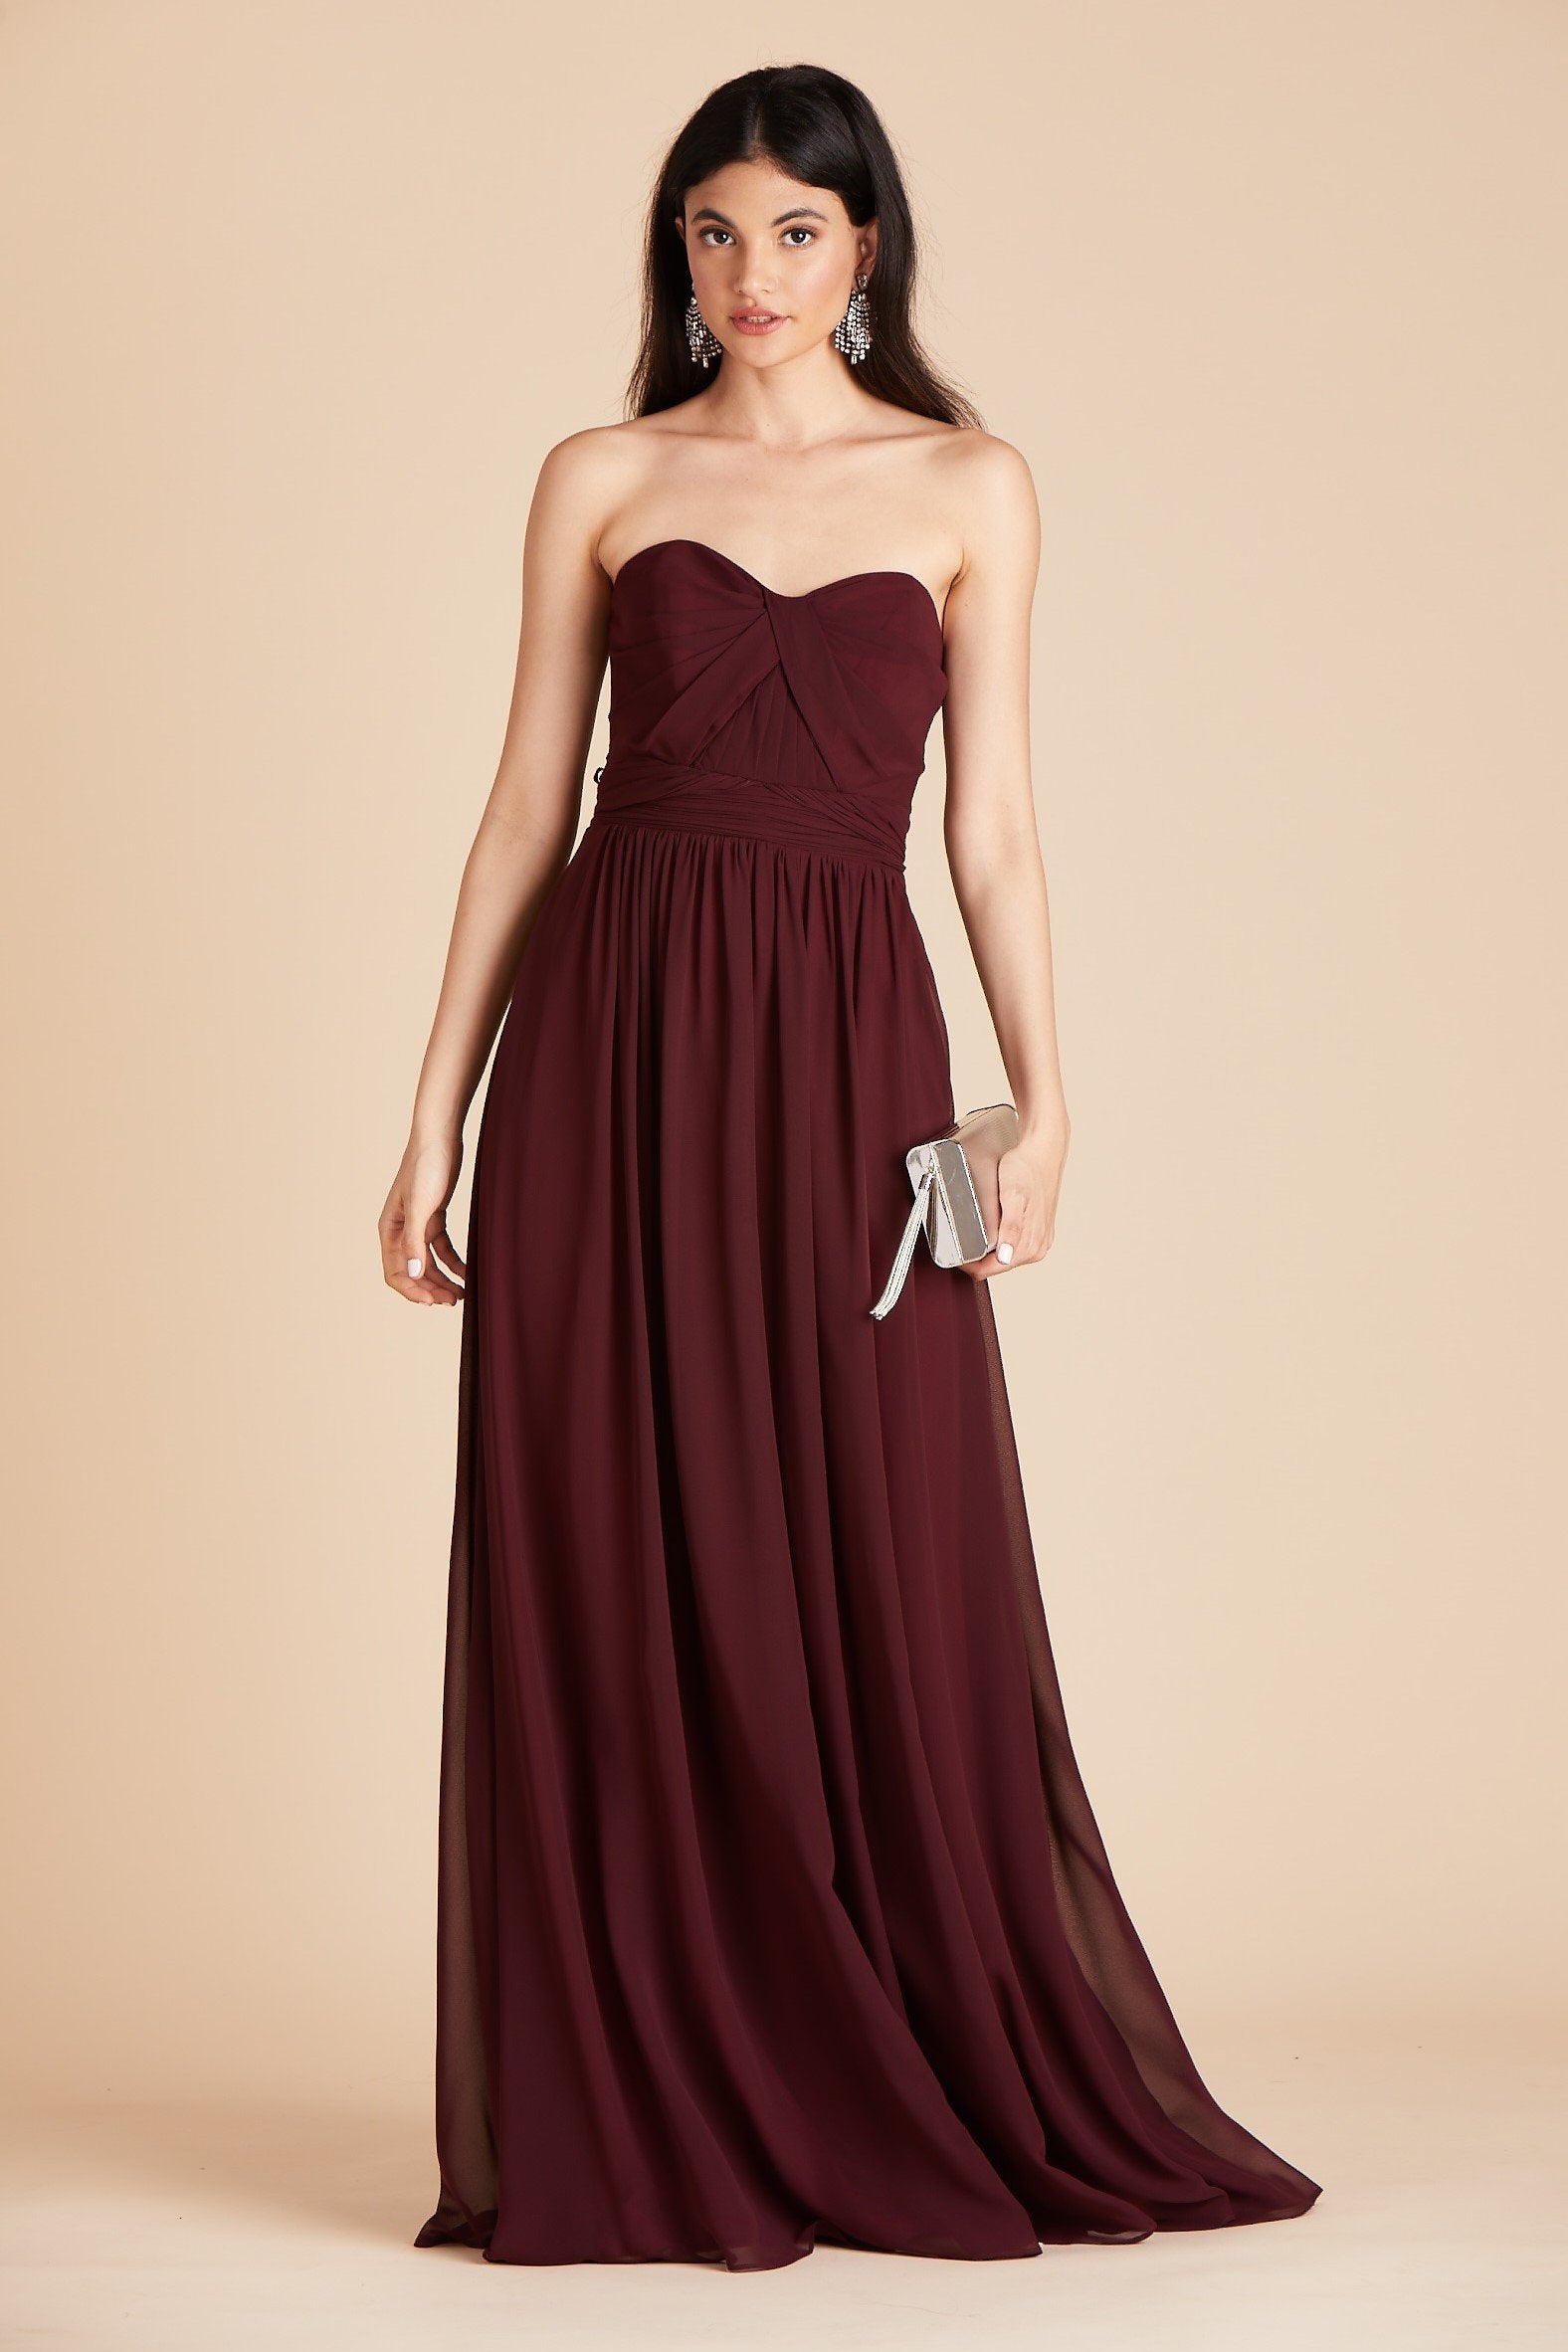 Grace convertible bridesmaid dress in cabernet burgundy chiffon by Birdy Grey, front view